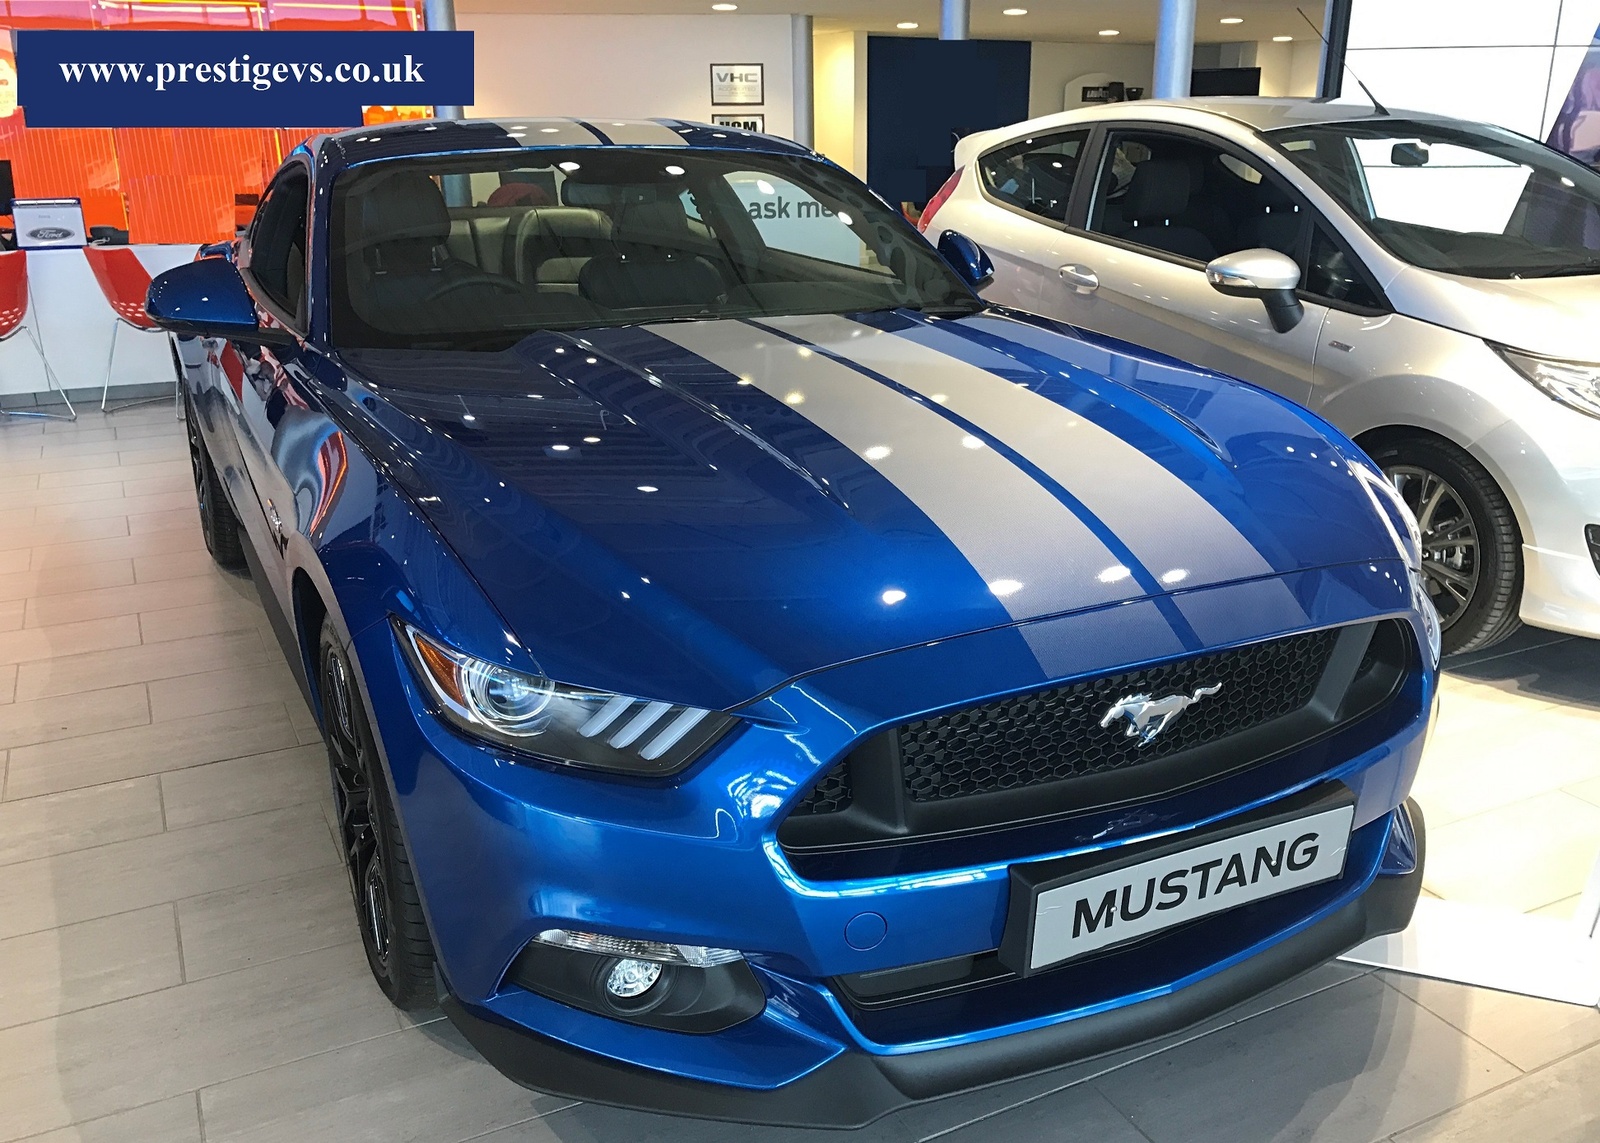 Ford Mustang Questions - What kind of stripes should I get ...